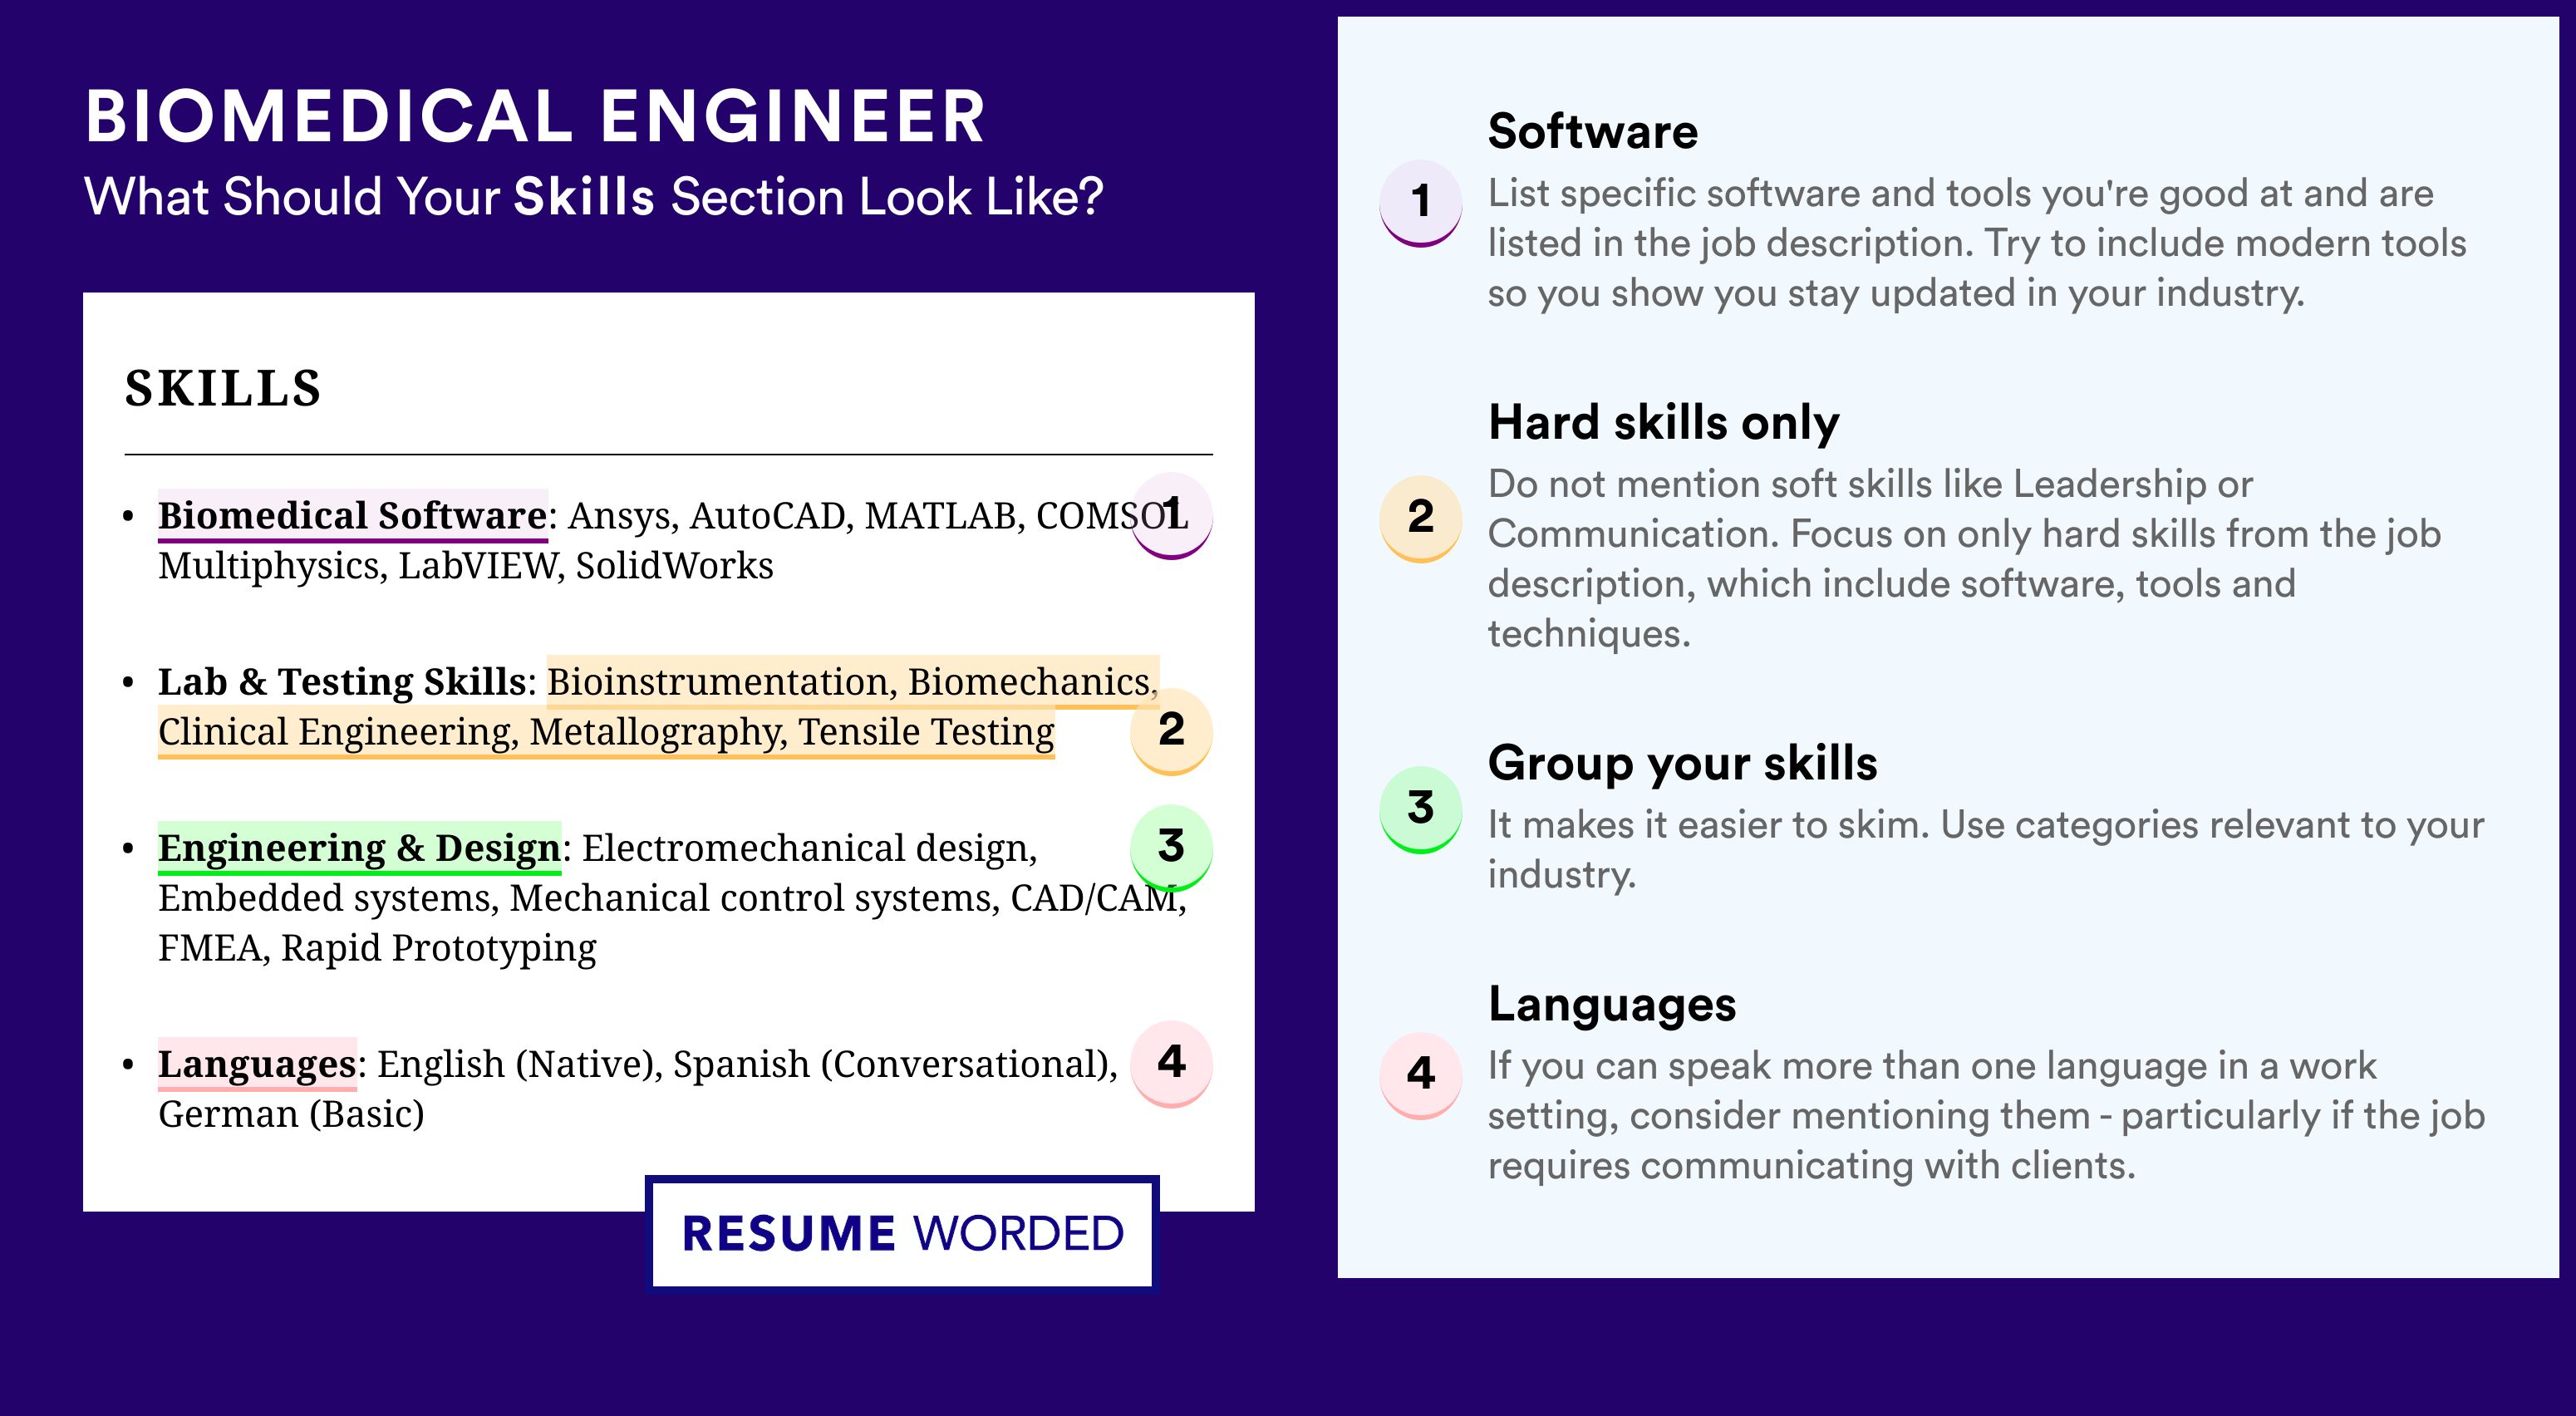 How To Write Your Skills Section - Biomedical Engineer Roles